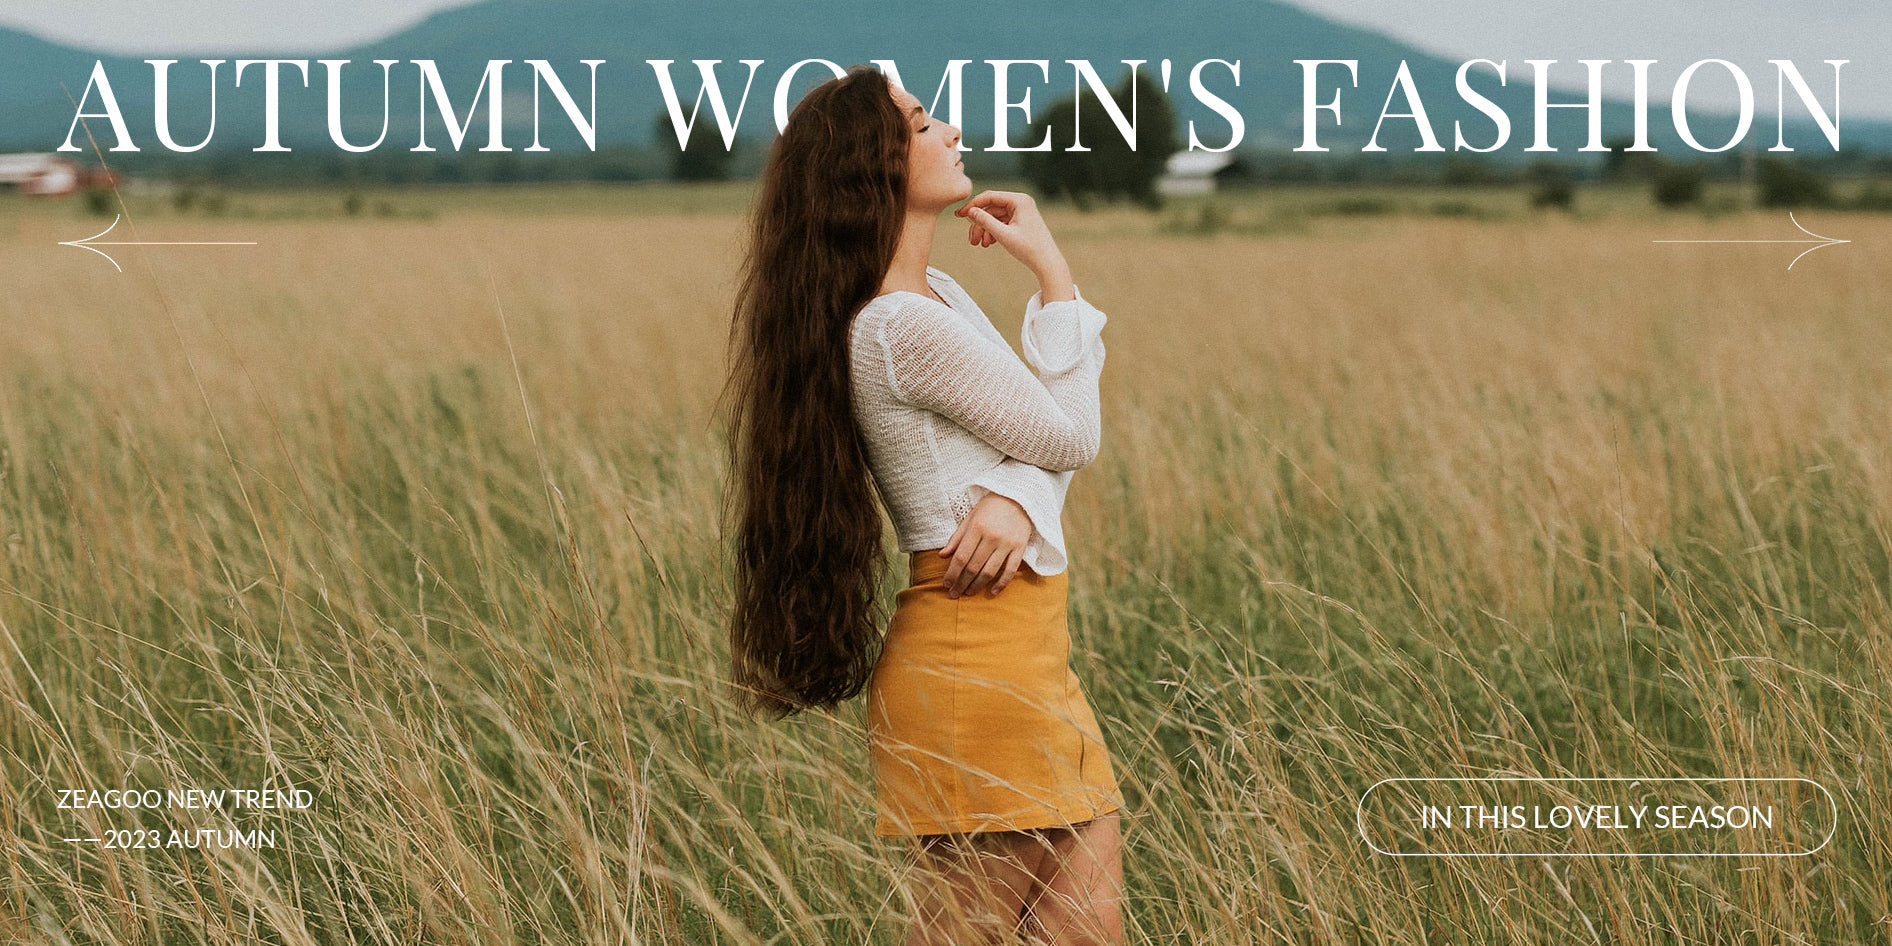 Autumn Women's Fashion Pairings and Trend Elements Sharing